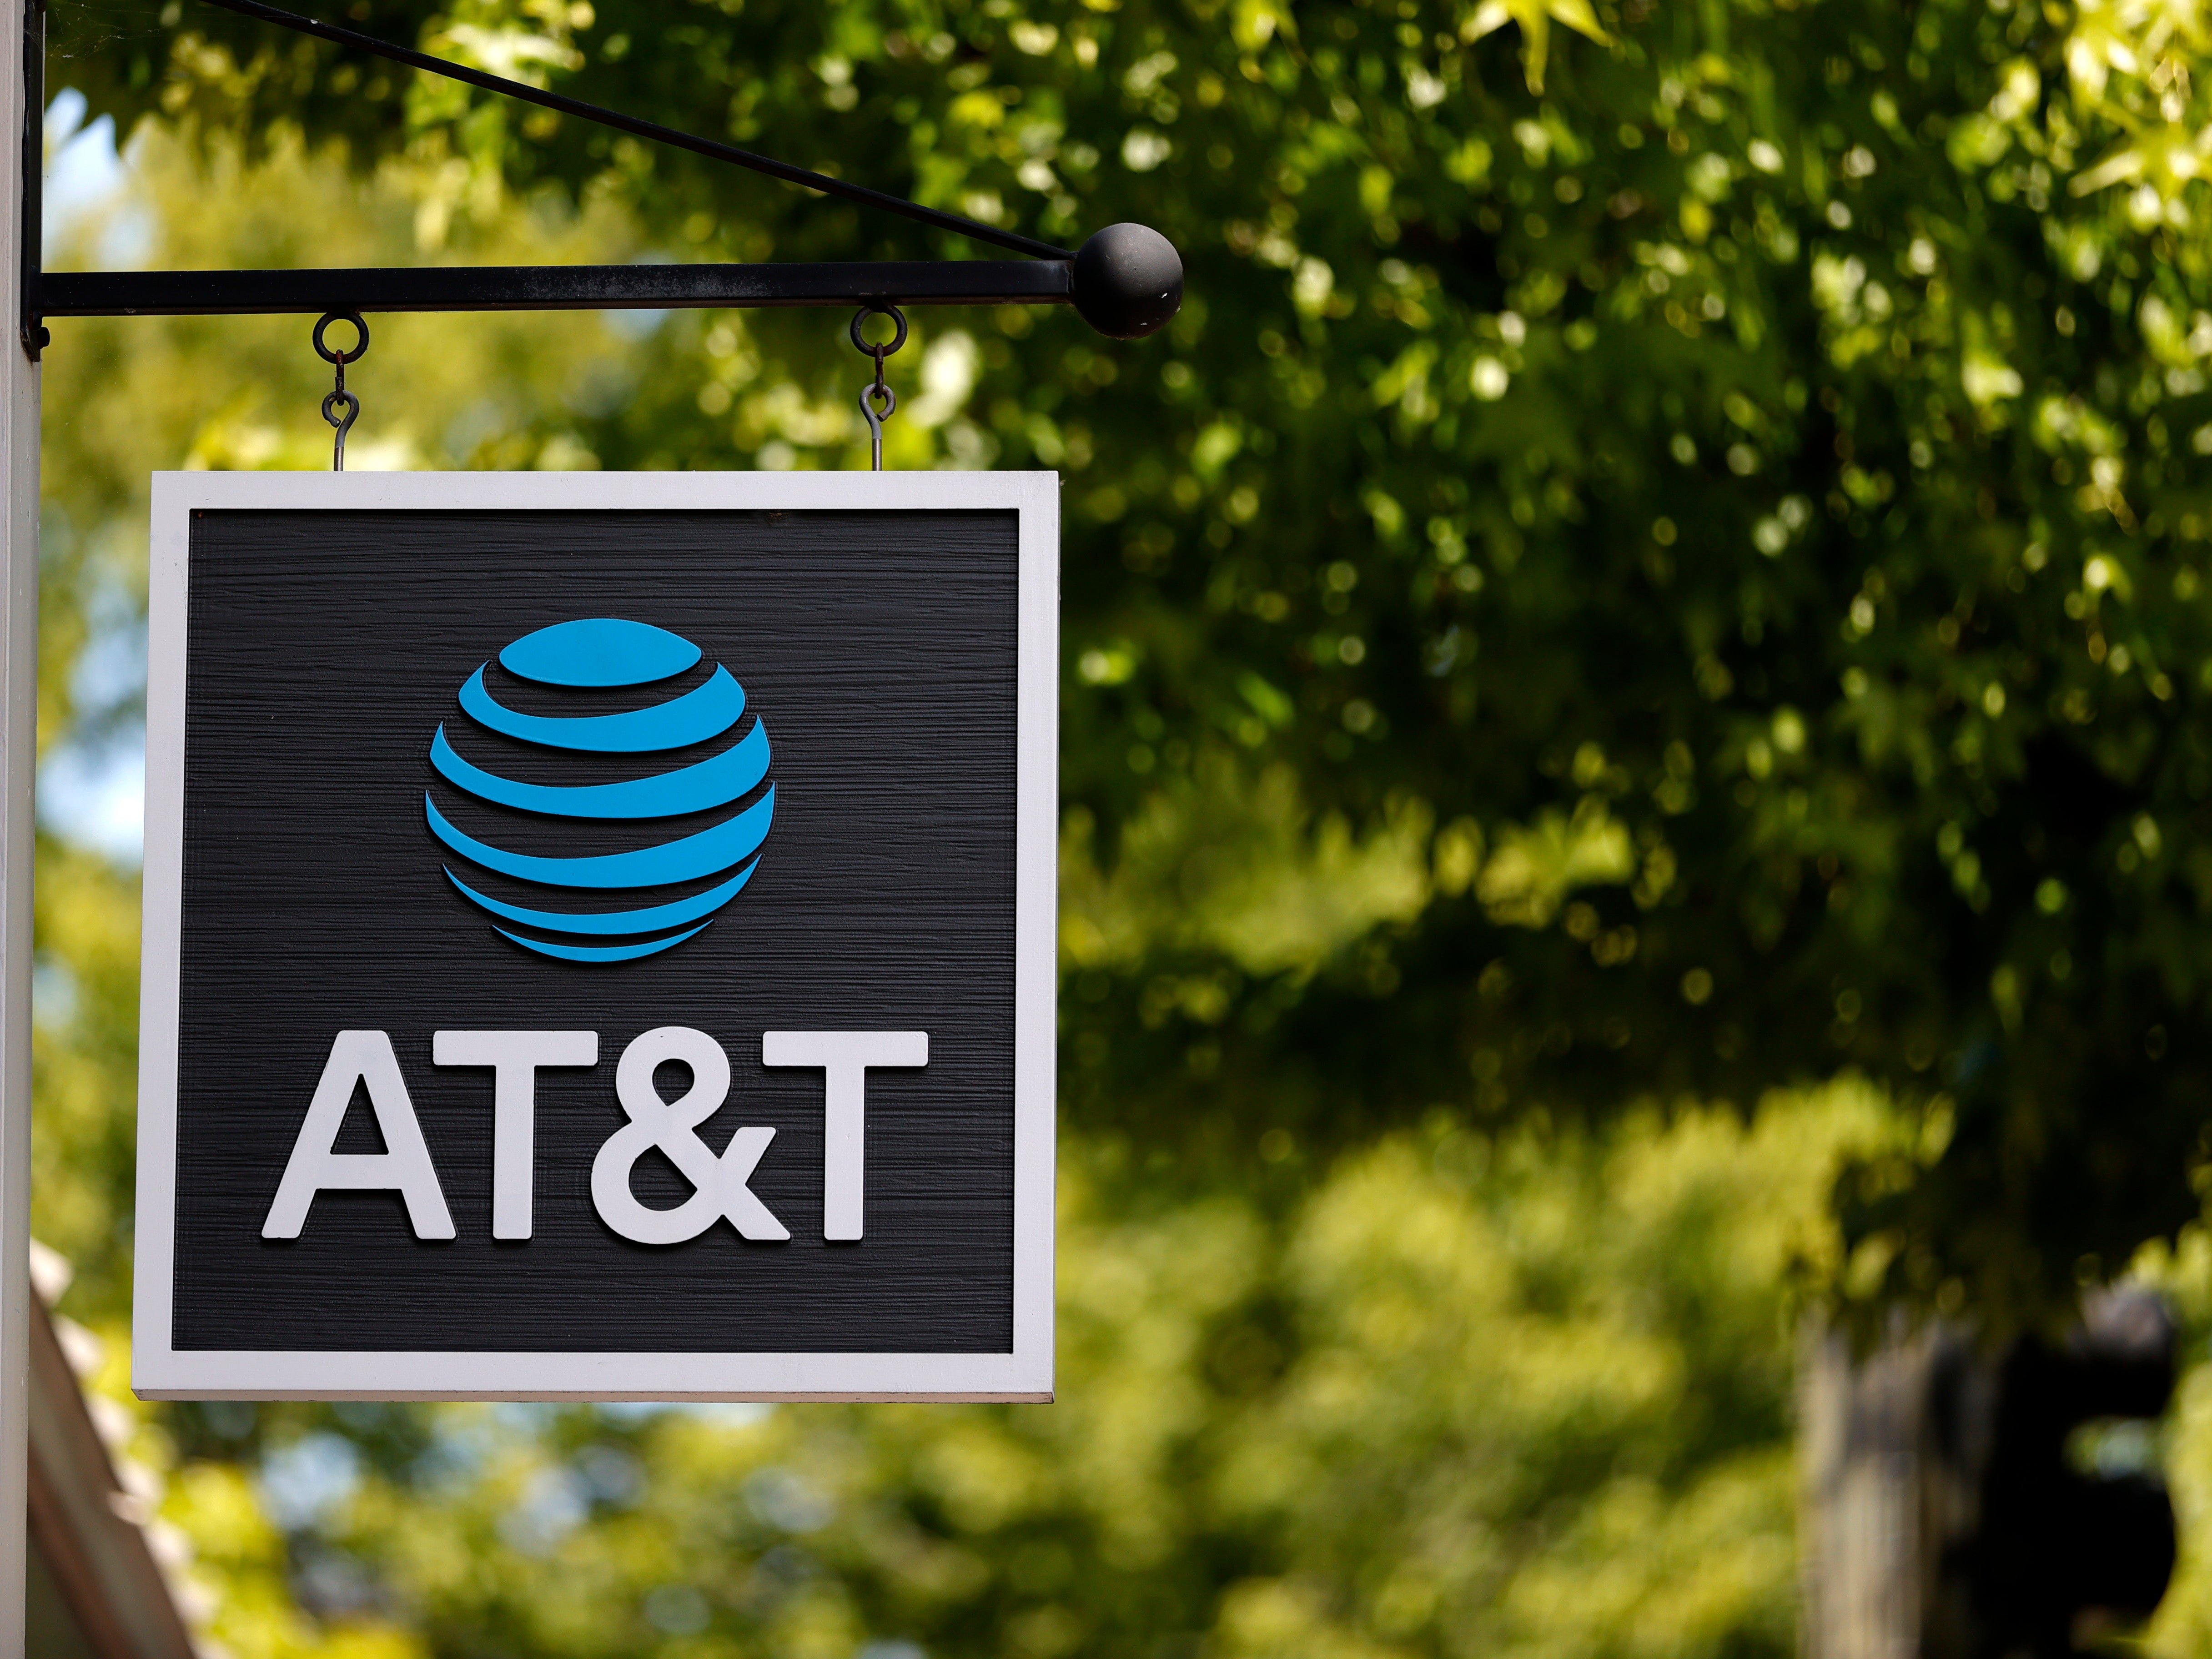 DirecTV May Yet Cost AT&T Another Dividend Cut (NYSE:T